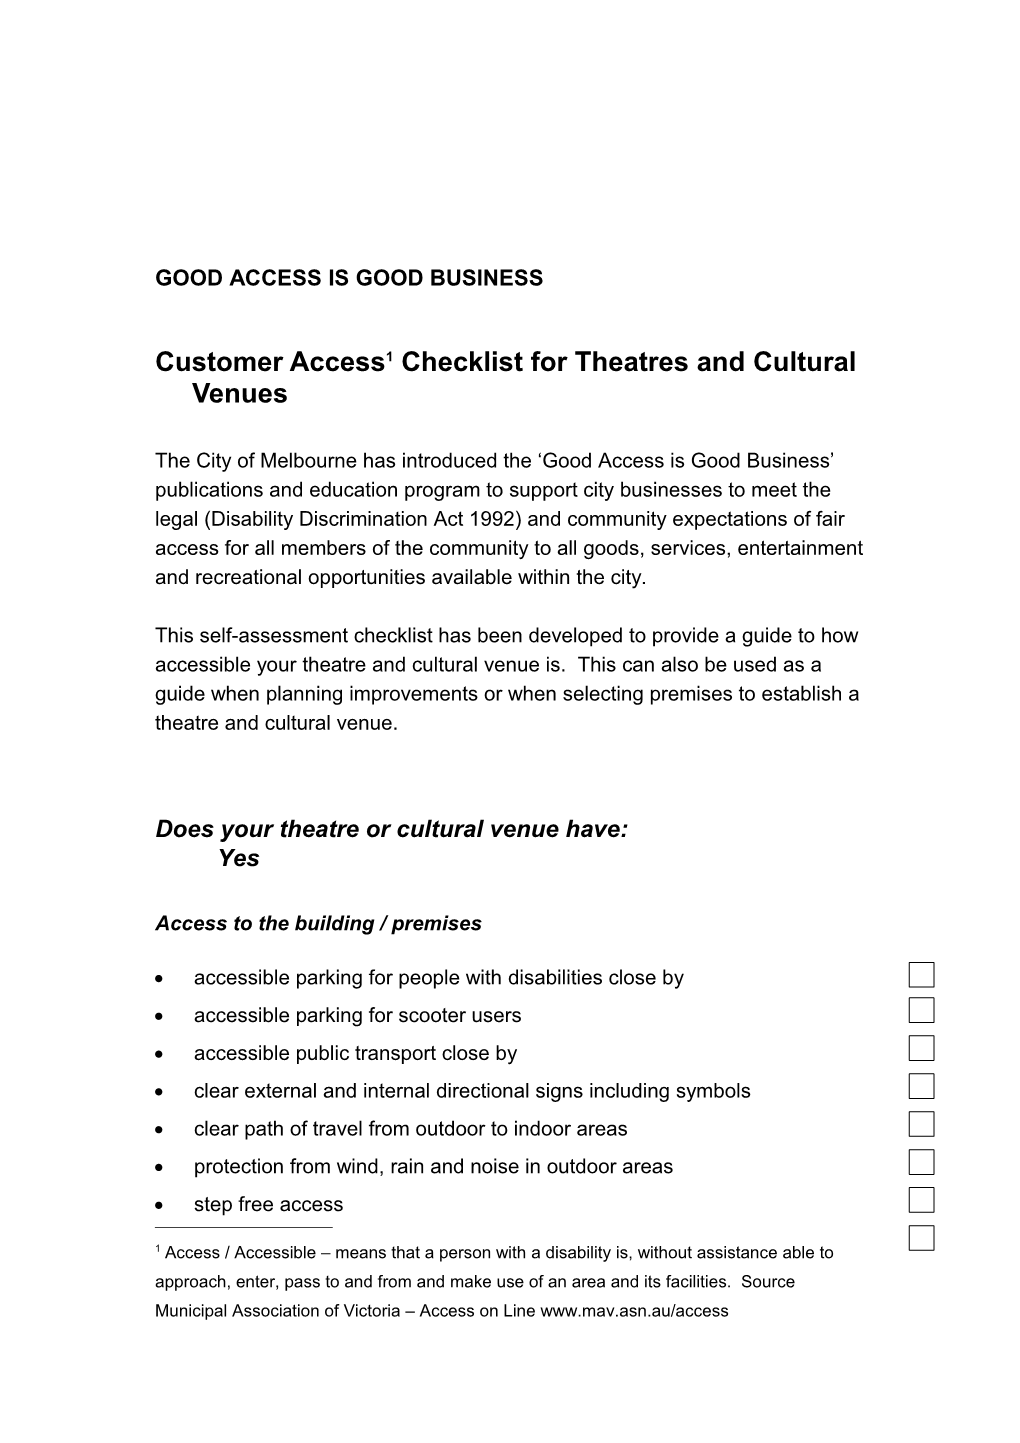 Customer Access Checklist for Theatres and Cultural Venues